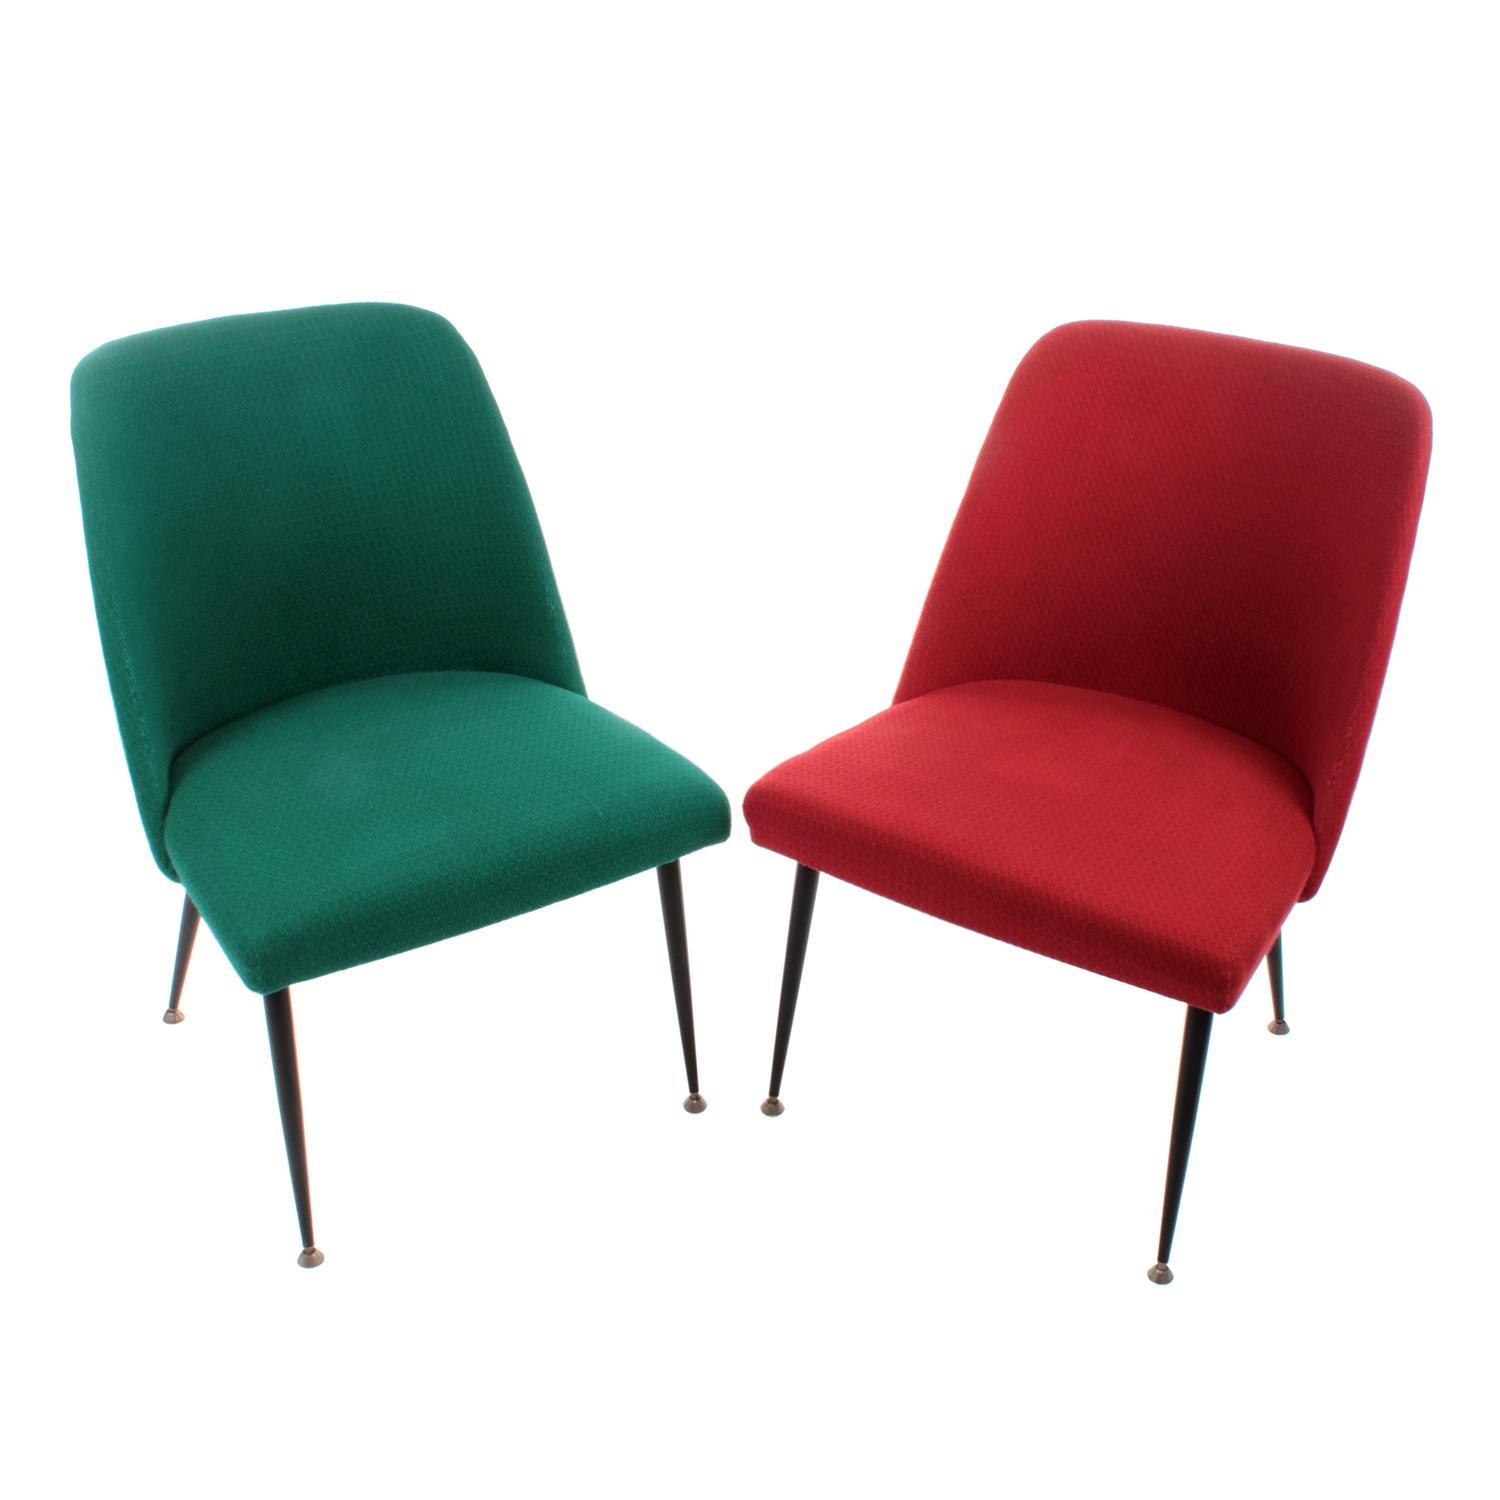 Pair of Accent Chairs circa 1950s Stylish Set of Accent Chairs or Slipper Chairs